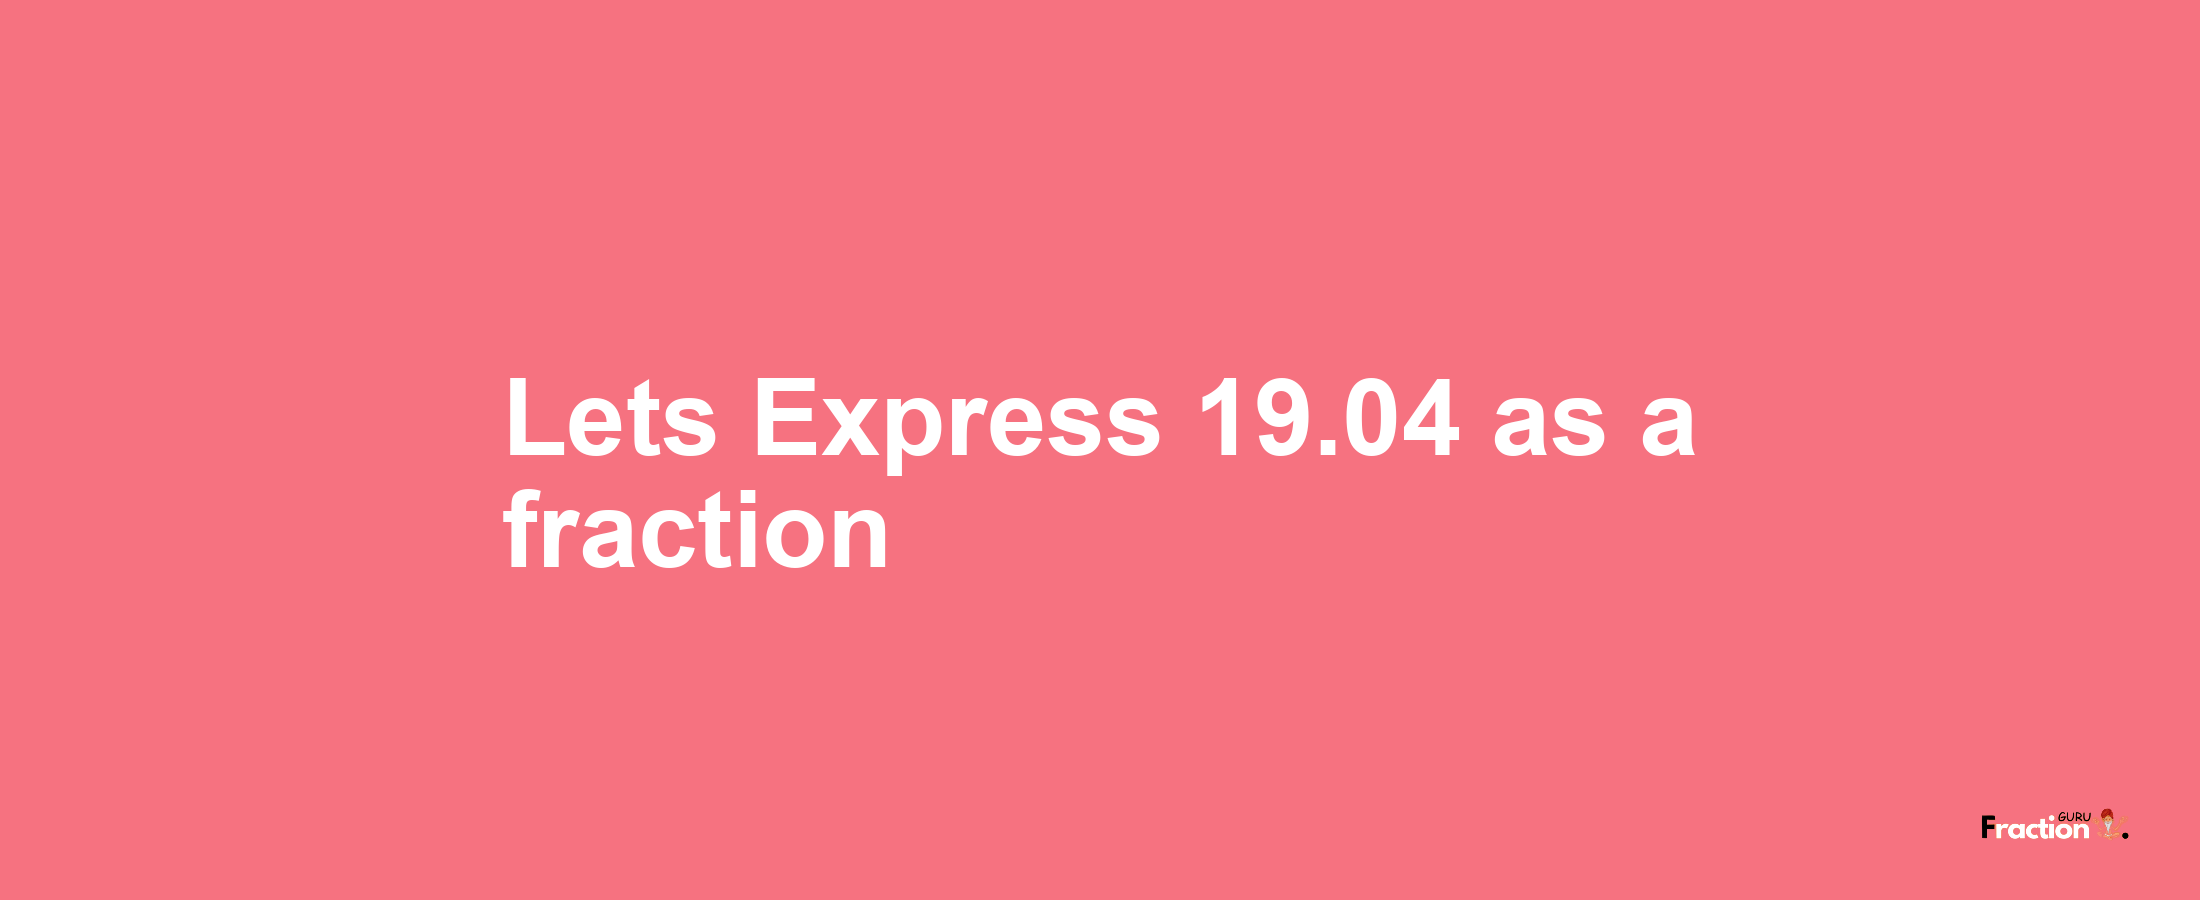 Lets Express 19.04 as afraction